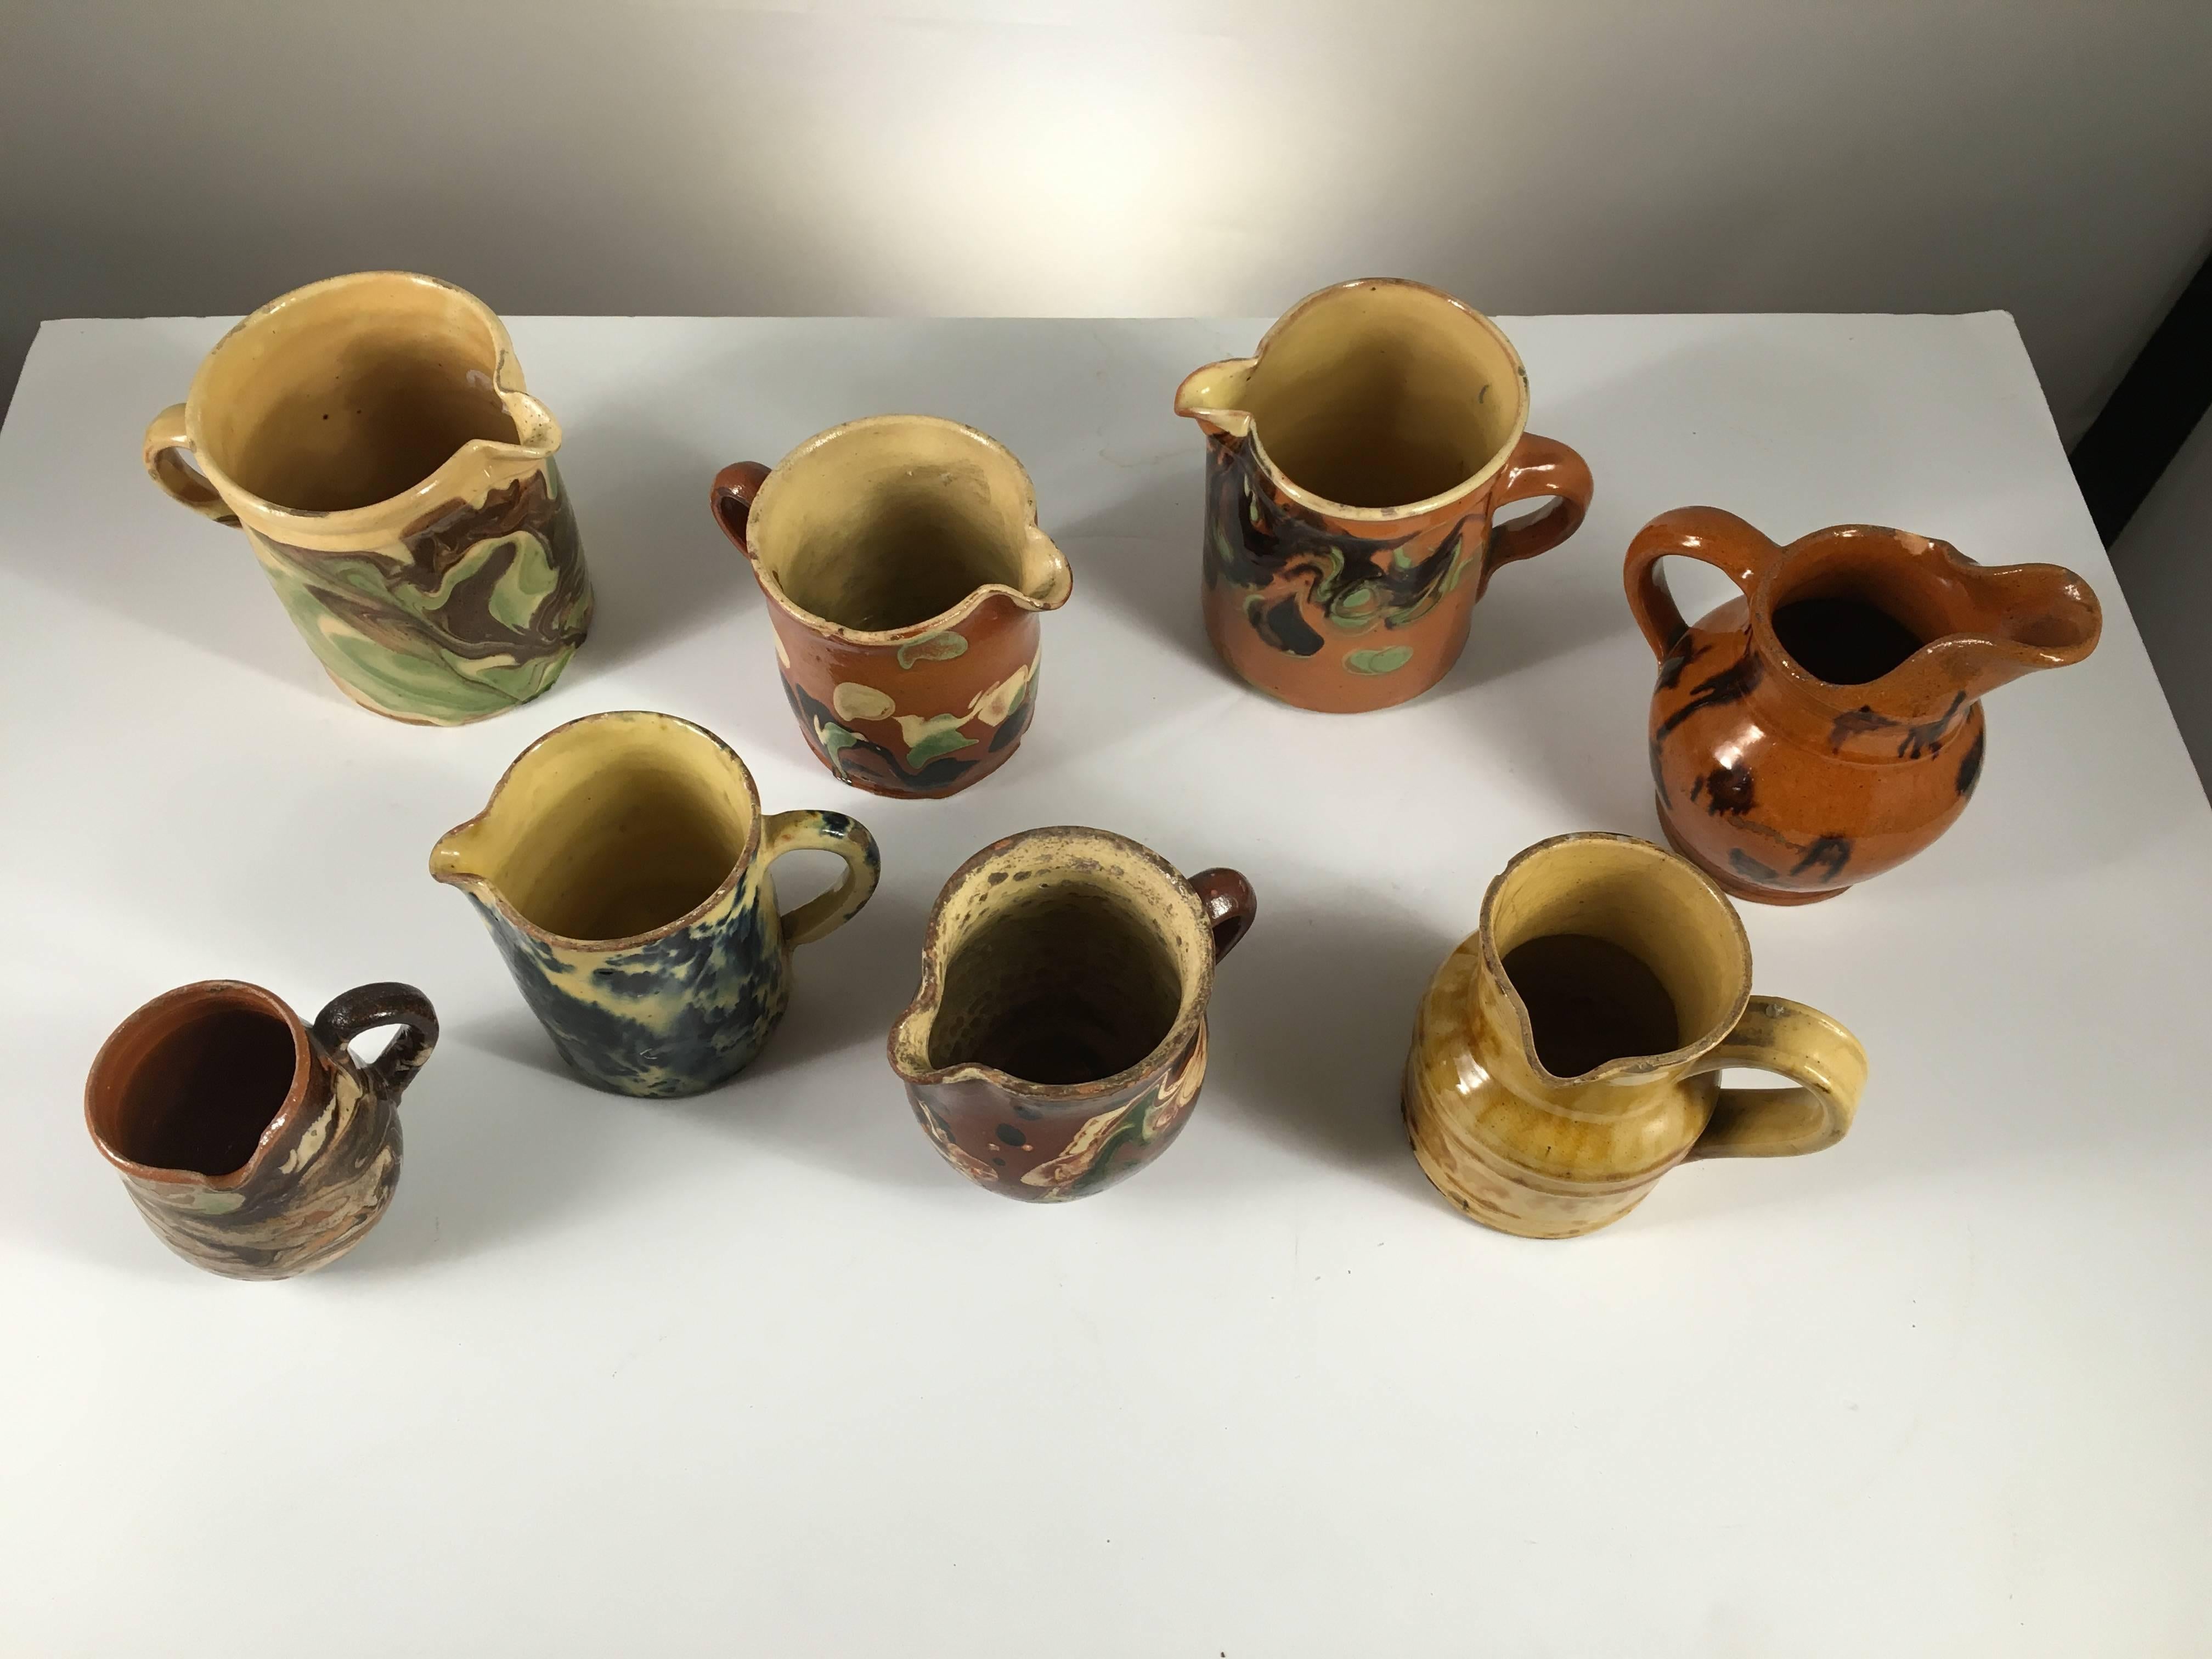 Pottery Collection of Eight Small French Provincial Jaspe Cream Pitchers, 19th Century